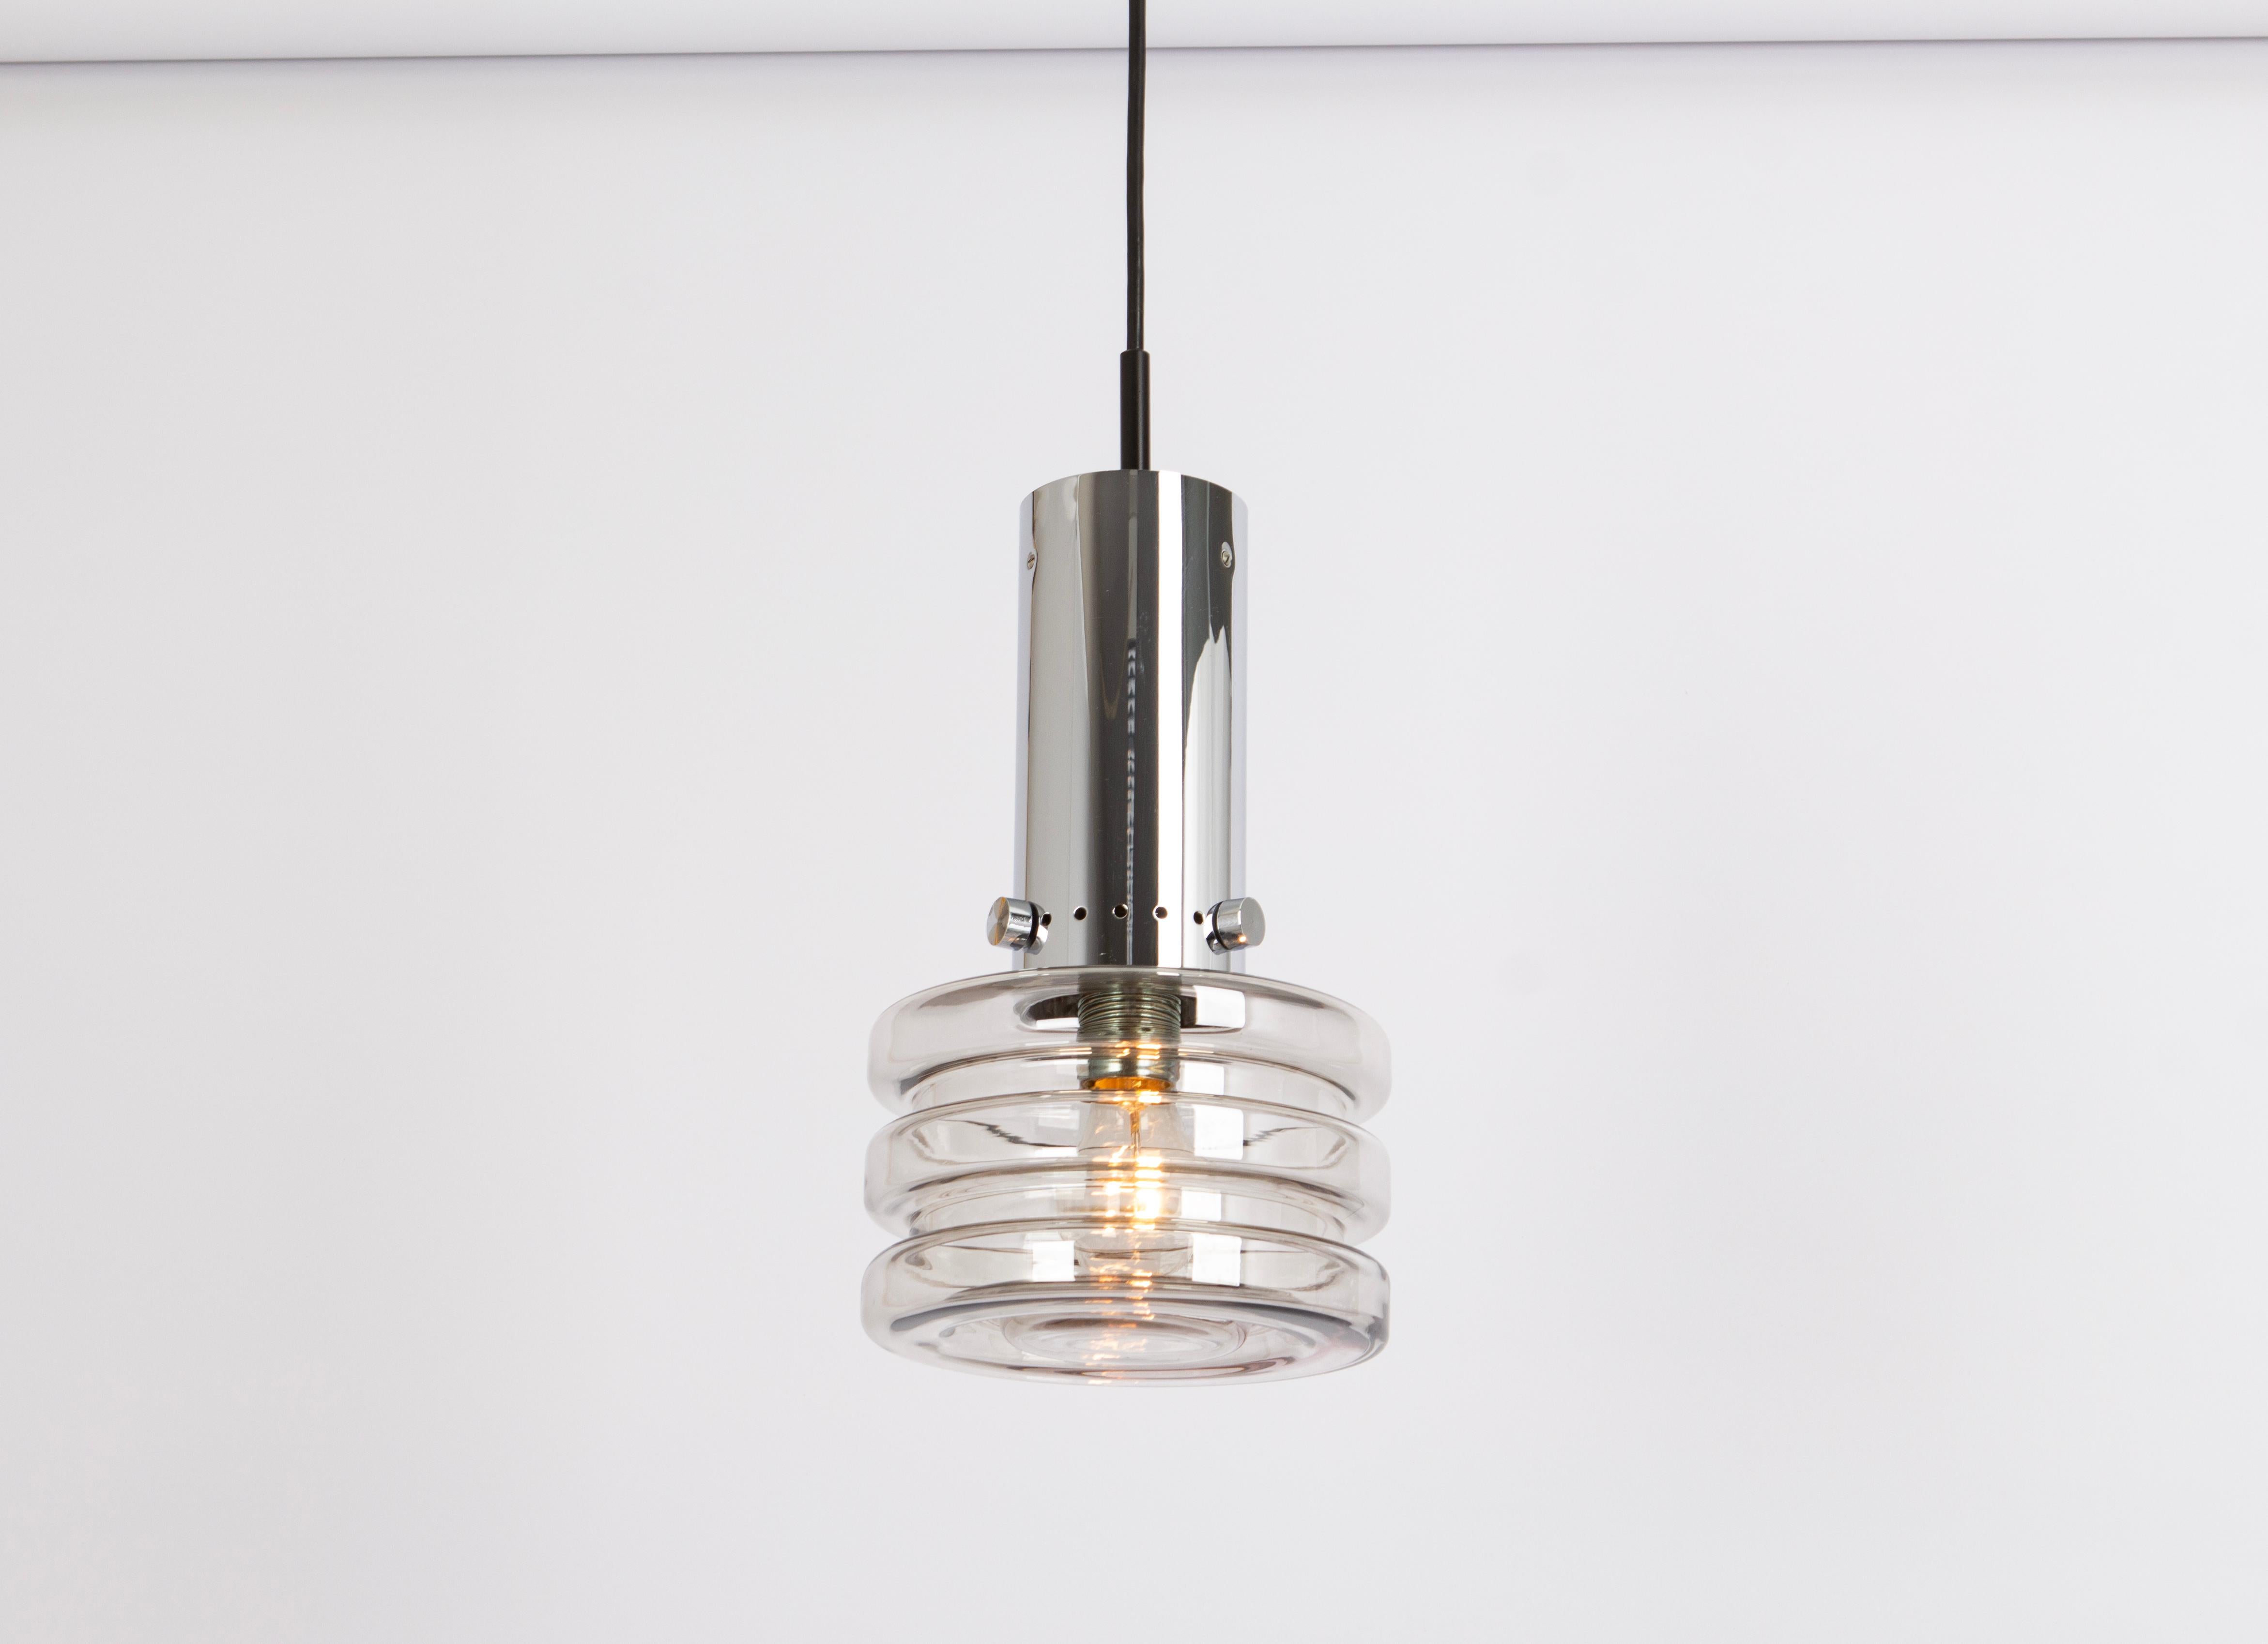 1 of 4 petite glass pendant lights made by Limburg, manufactured in Germany, circa the 1970s

Sockets: It needs 1 x E27 standard bulb.
Light bulbs are not included. It is possible to install this fixture in all countries (US, UK, Europe, Asia,